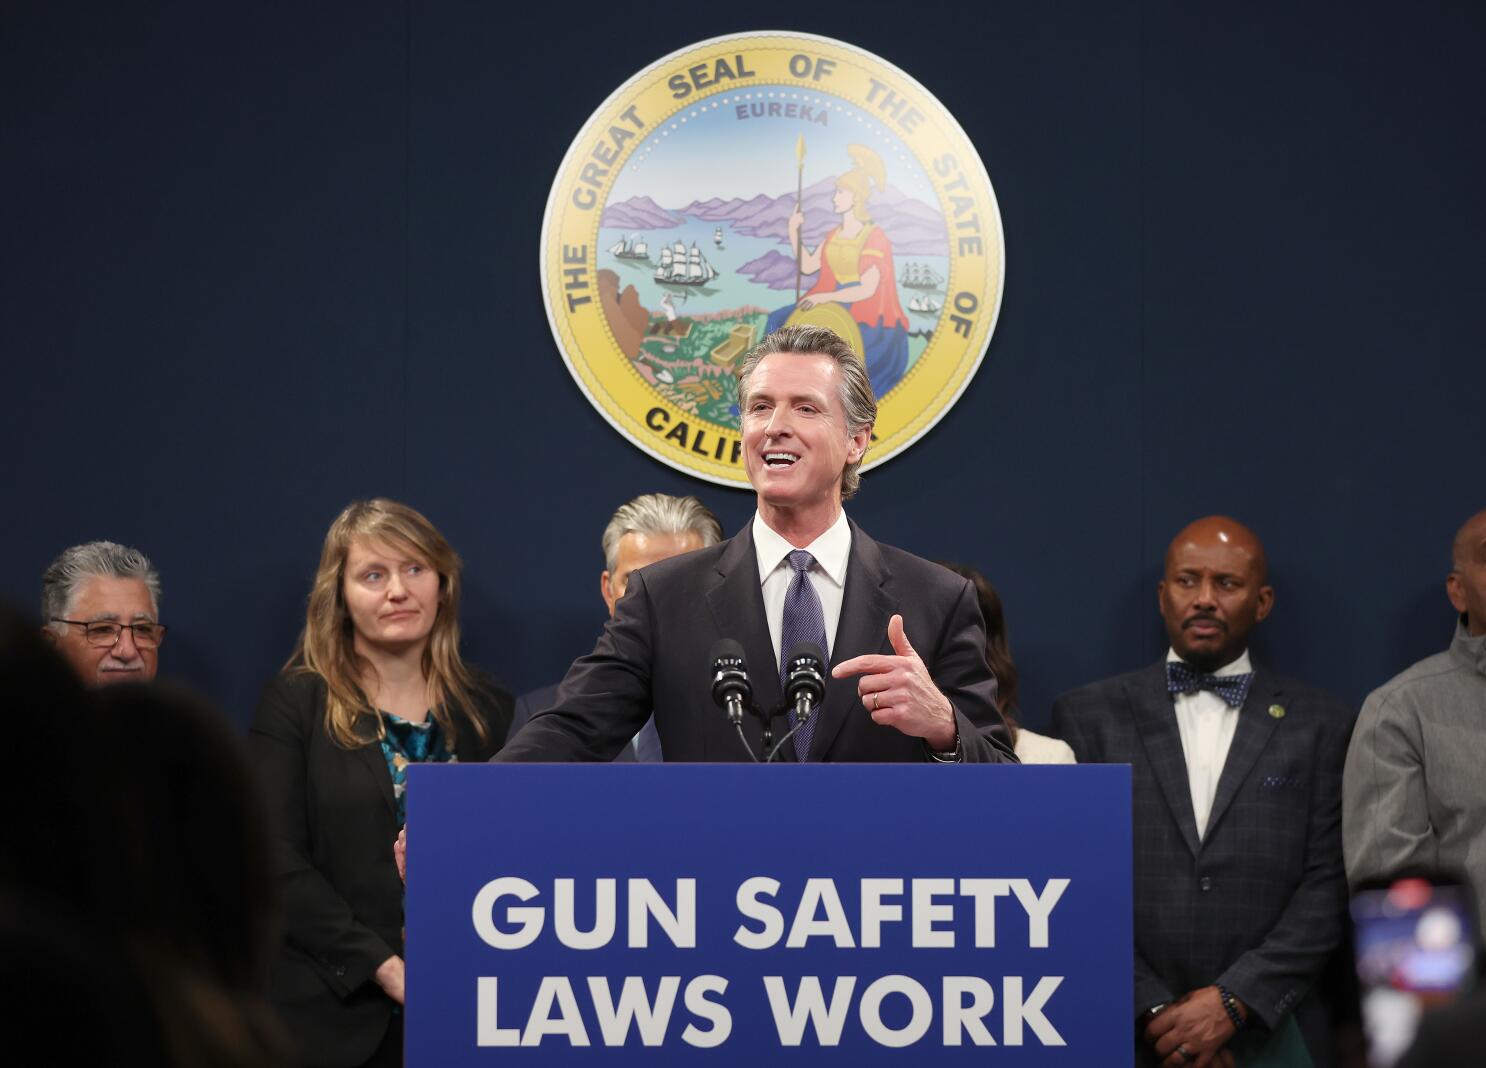 California Democrats approve new concealed-carry rules - Los Angeles Times